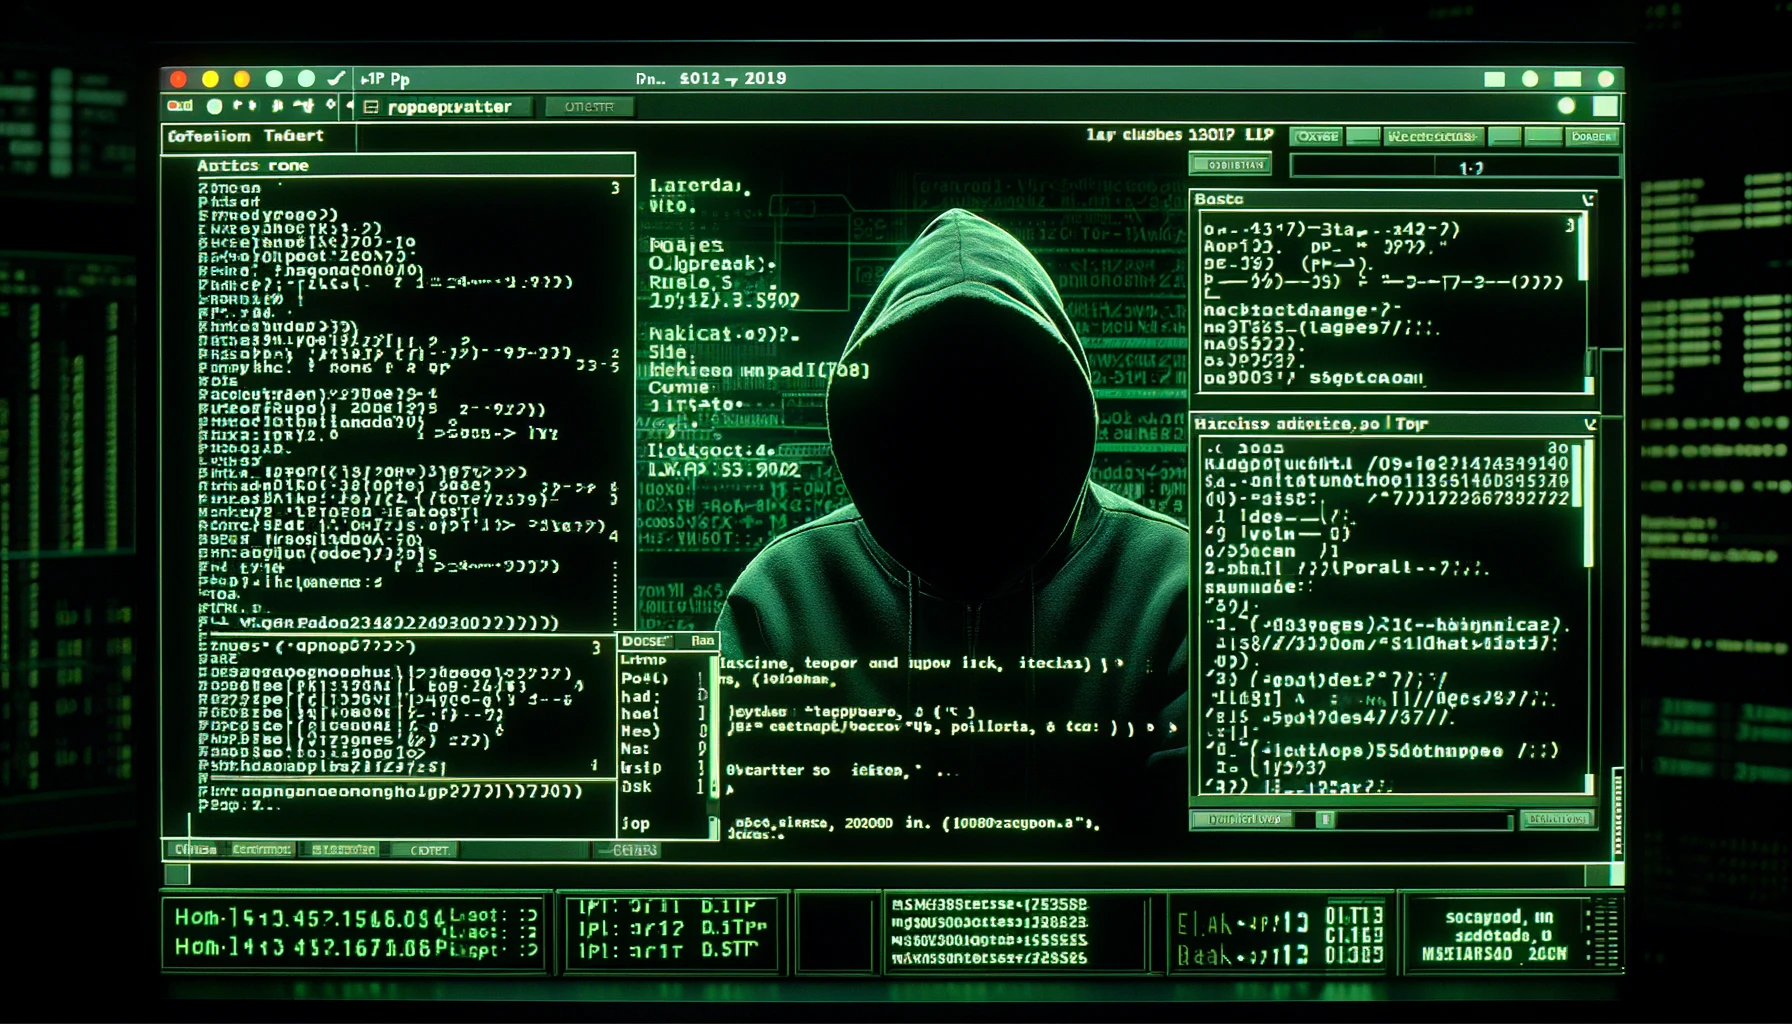 Hacker's computer terminal with green text on black background, featuring code, IP addresses, and network diagrams.